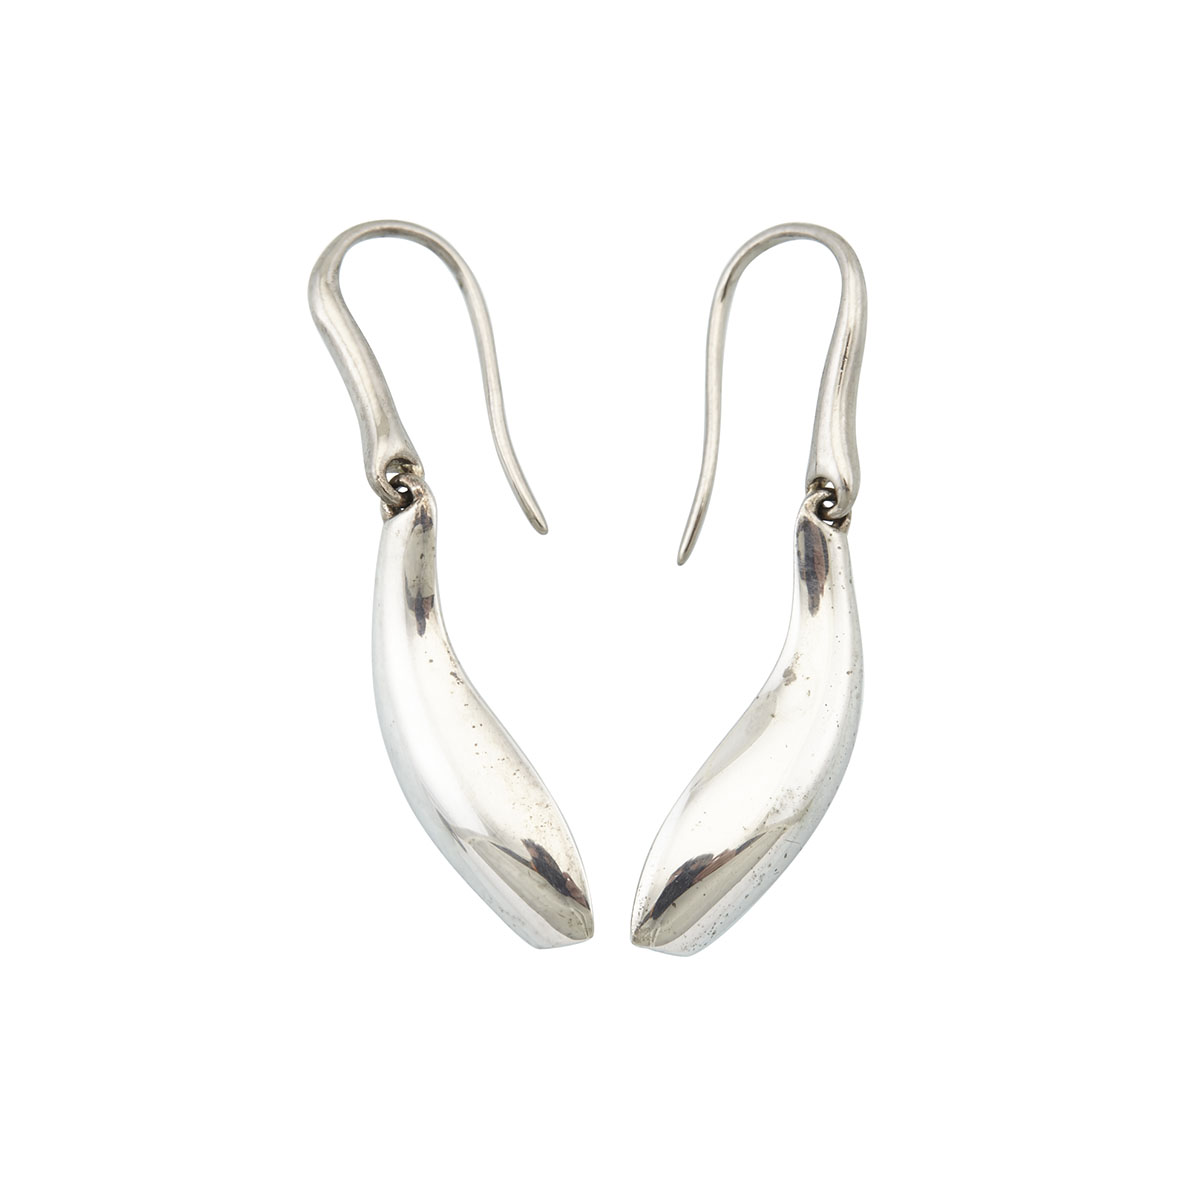 Pair Of Tiffany & Company Frank Gehry Sterling Silver Hook-Back Fish Earrings